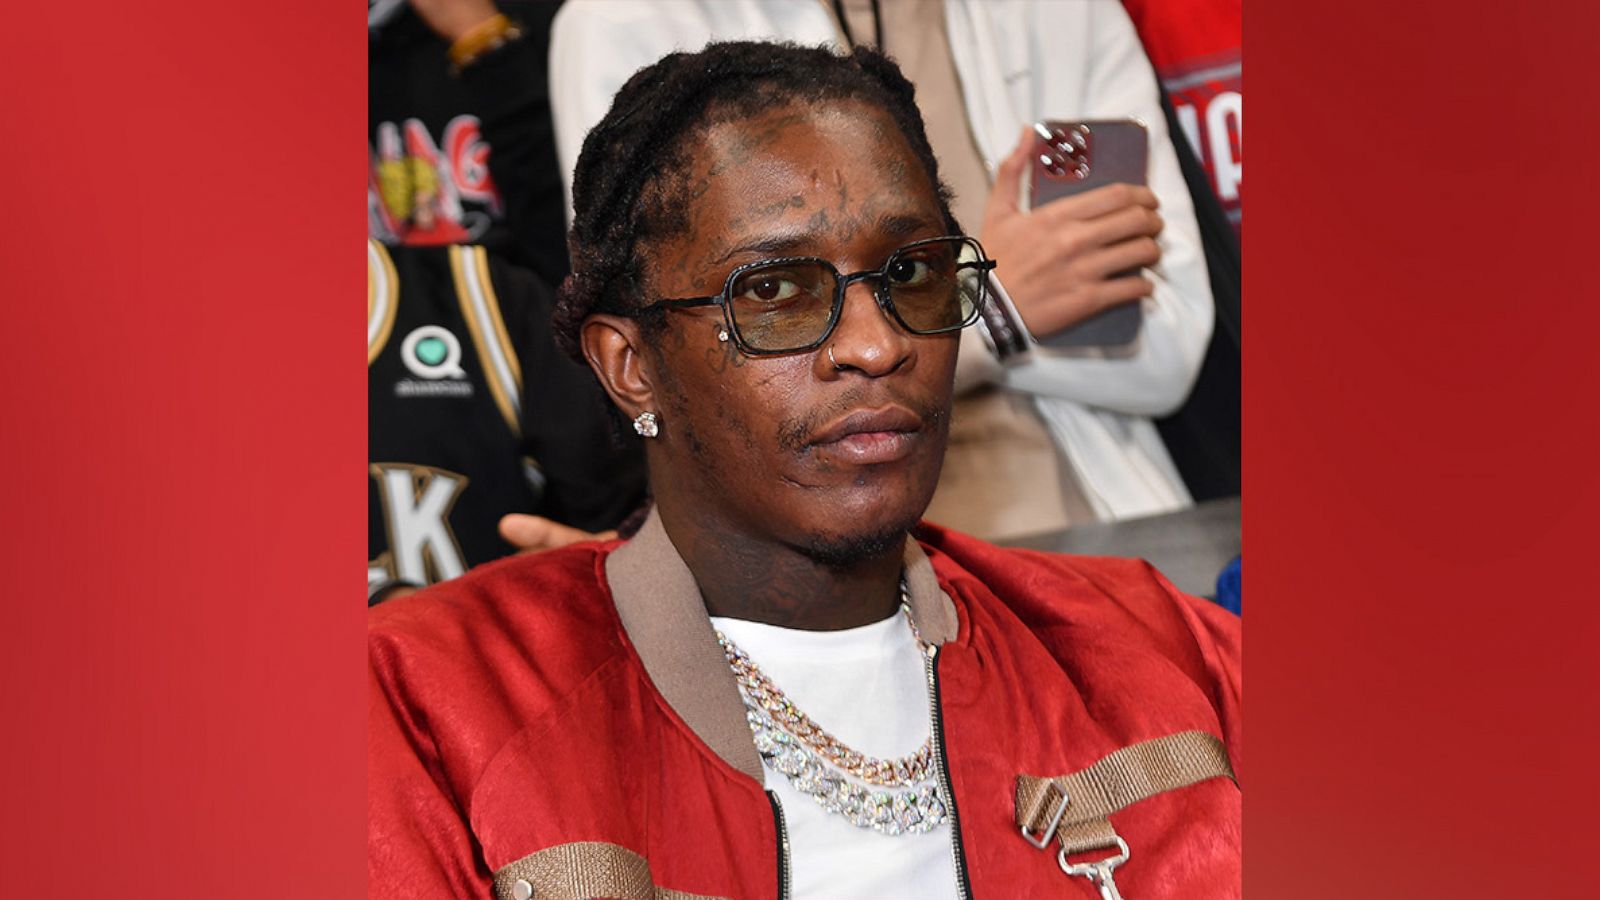 Rapper Young Thug sues over swiped bag that had cash, songs